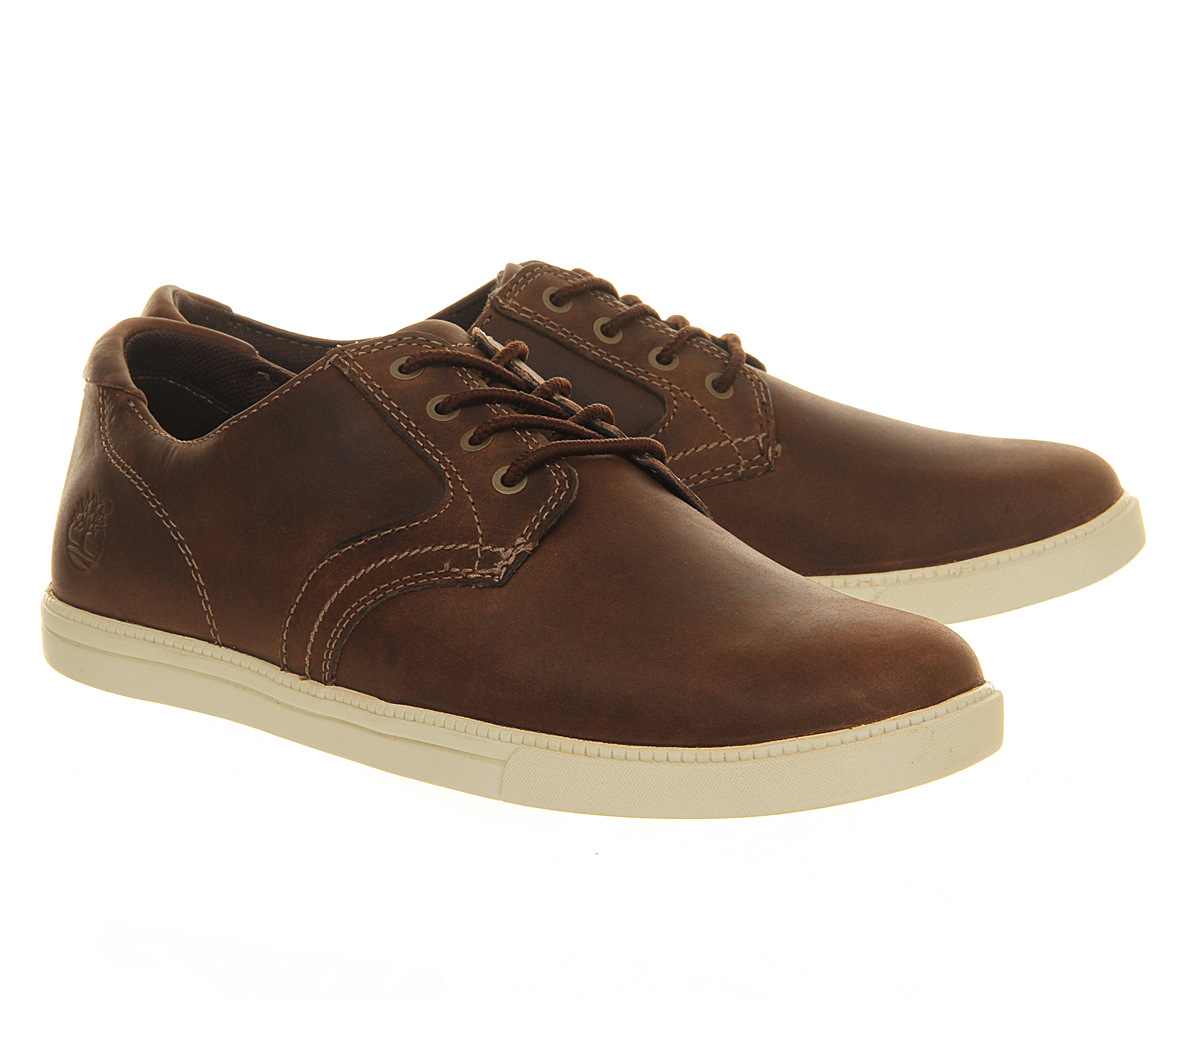 Timberland Fulk Oxford Shoes in Brown for Men - Lyst